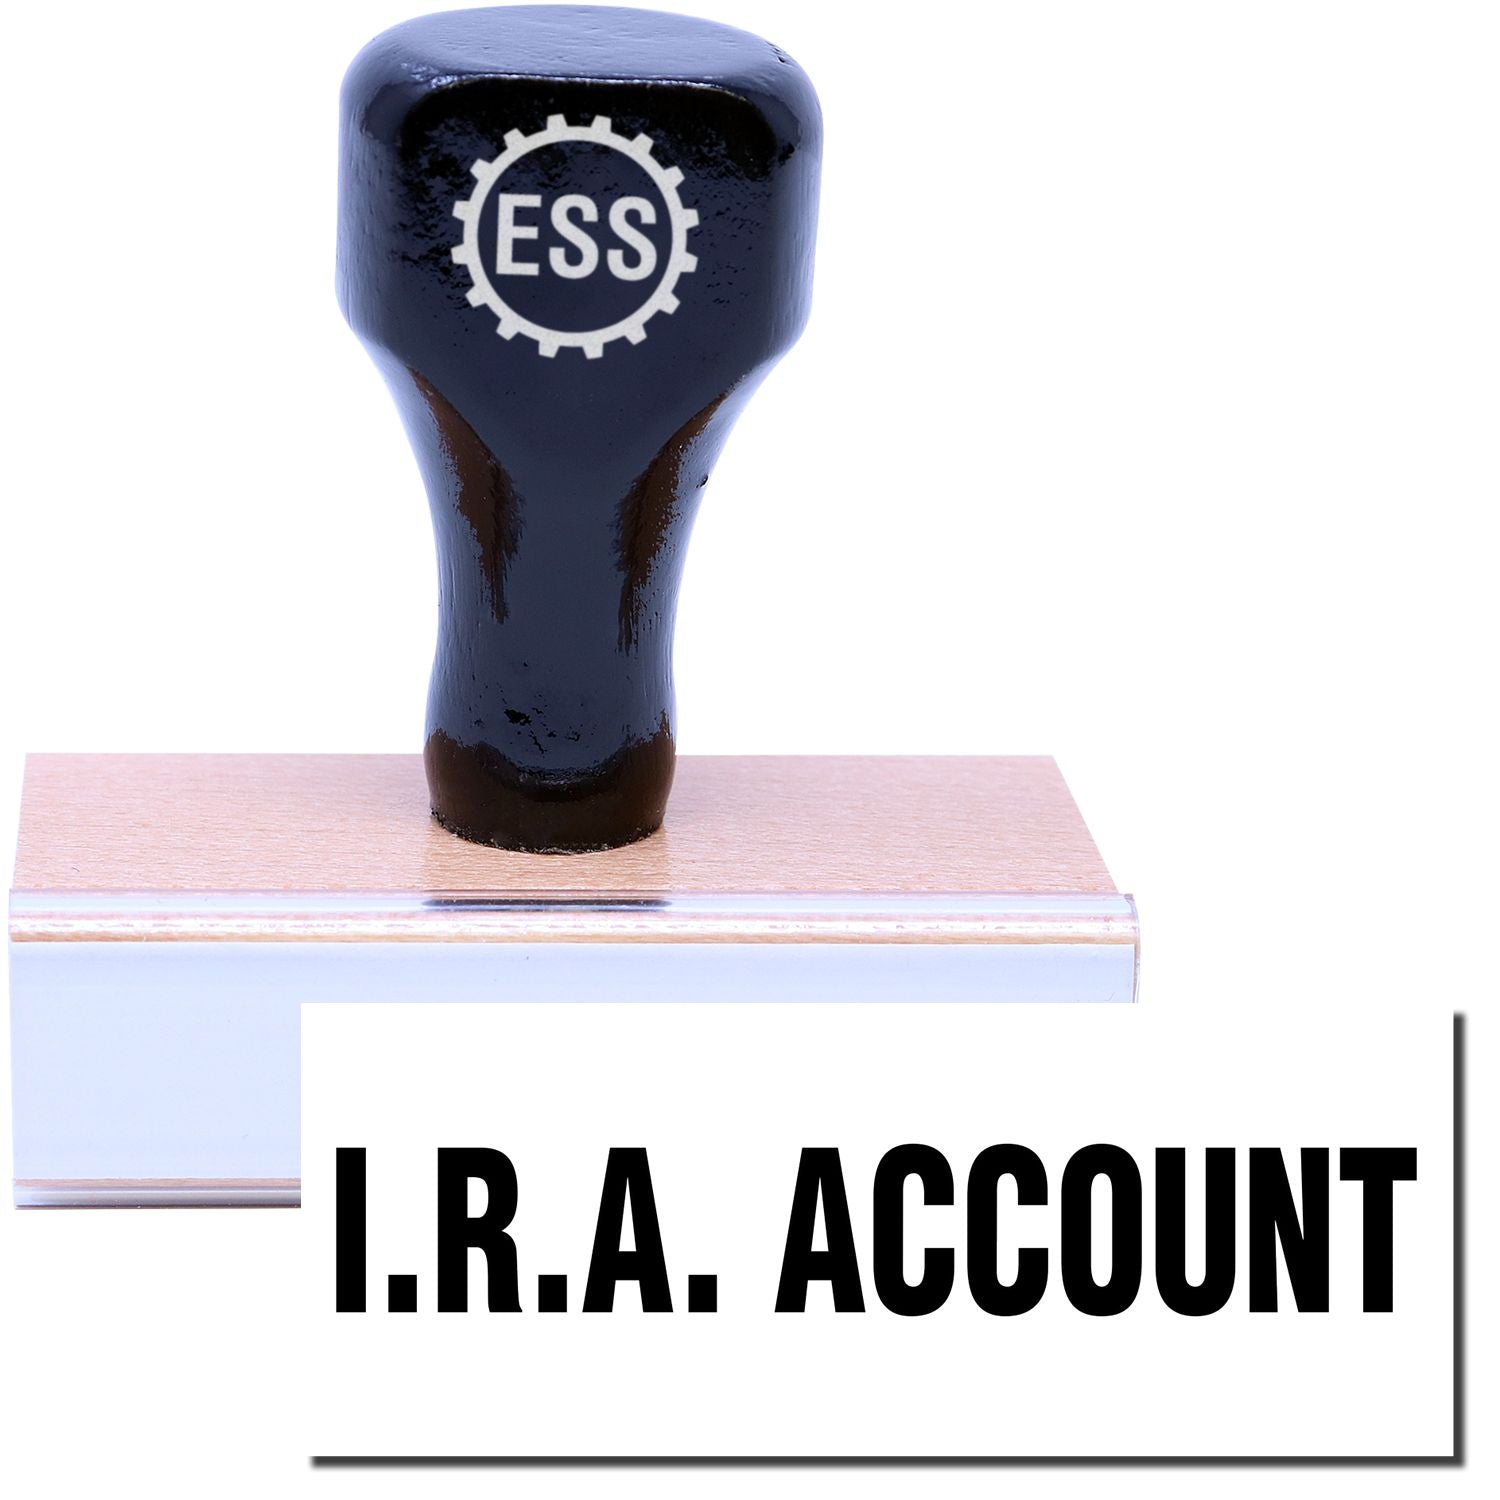 A stock office rubber stamp with a stamped image showing how the text "I.R.A. ACCOUNT" in a large font is displayed after stamping.